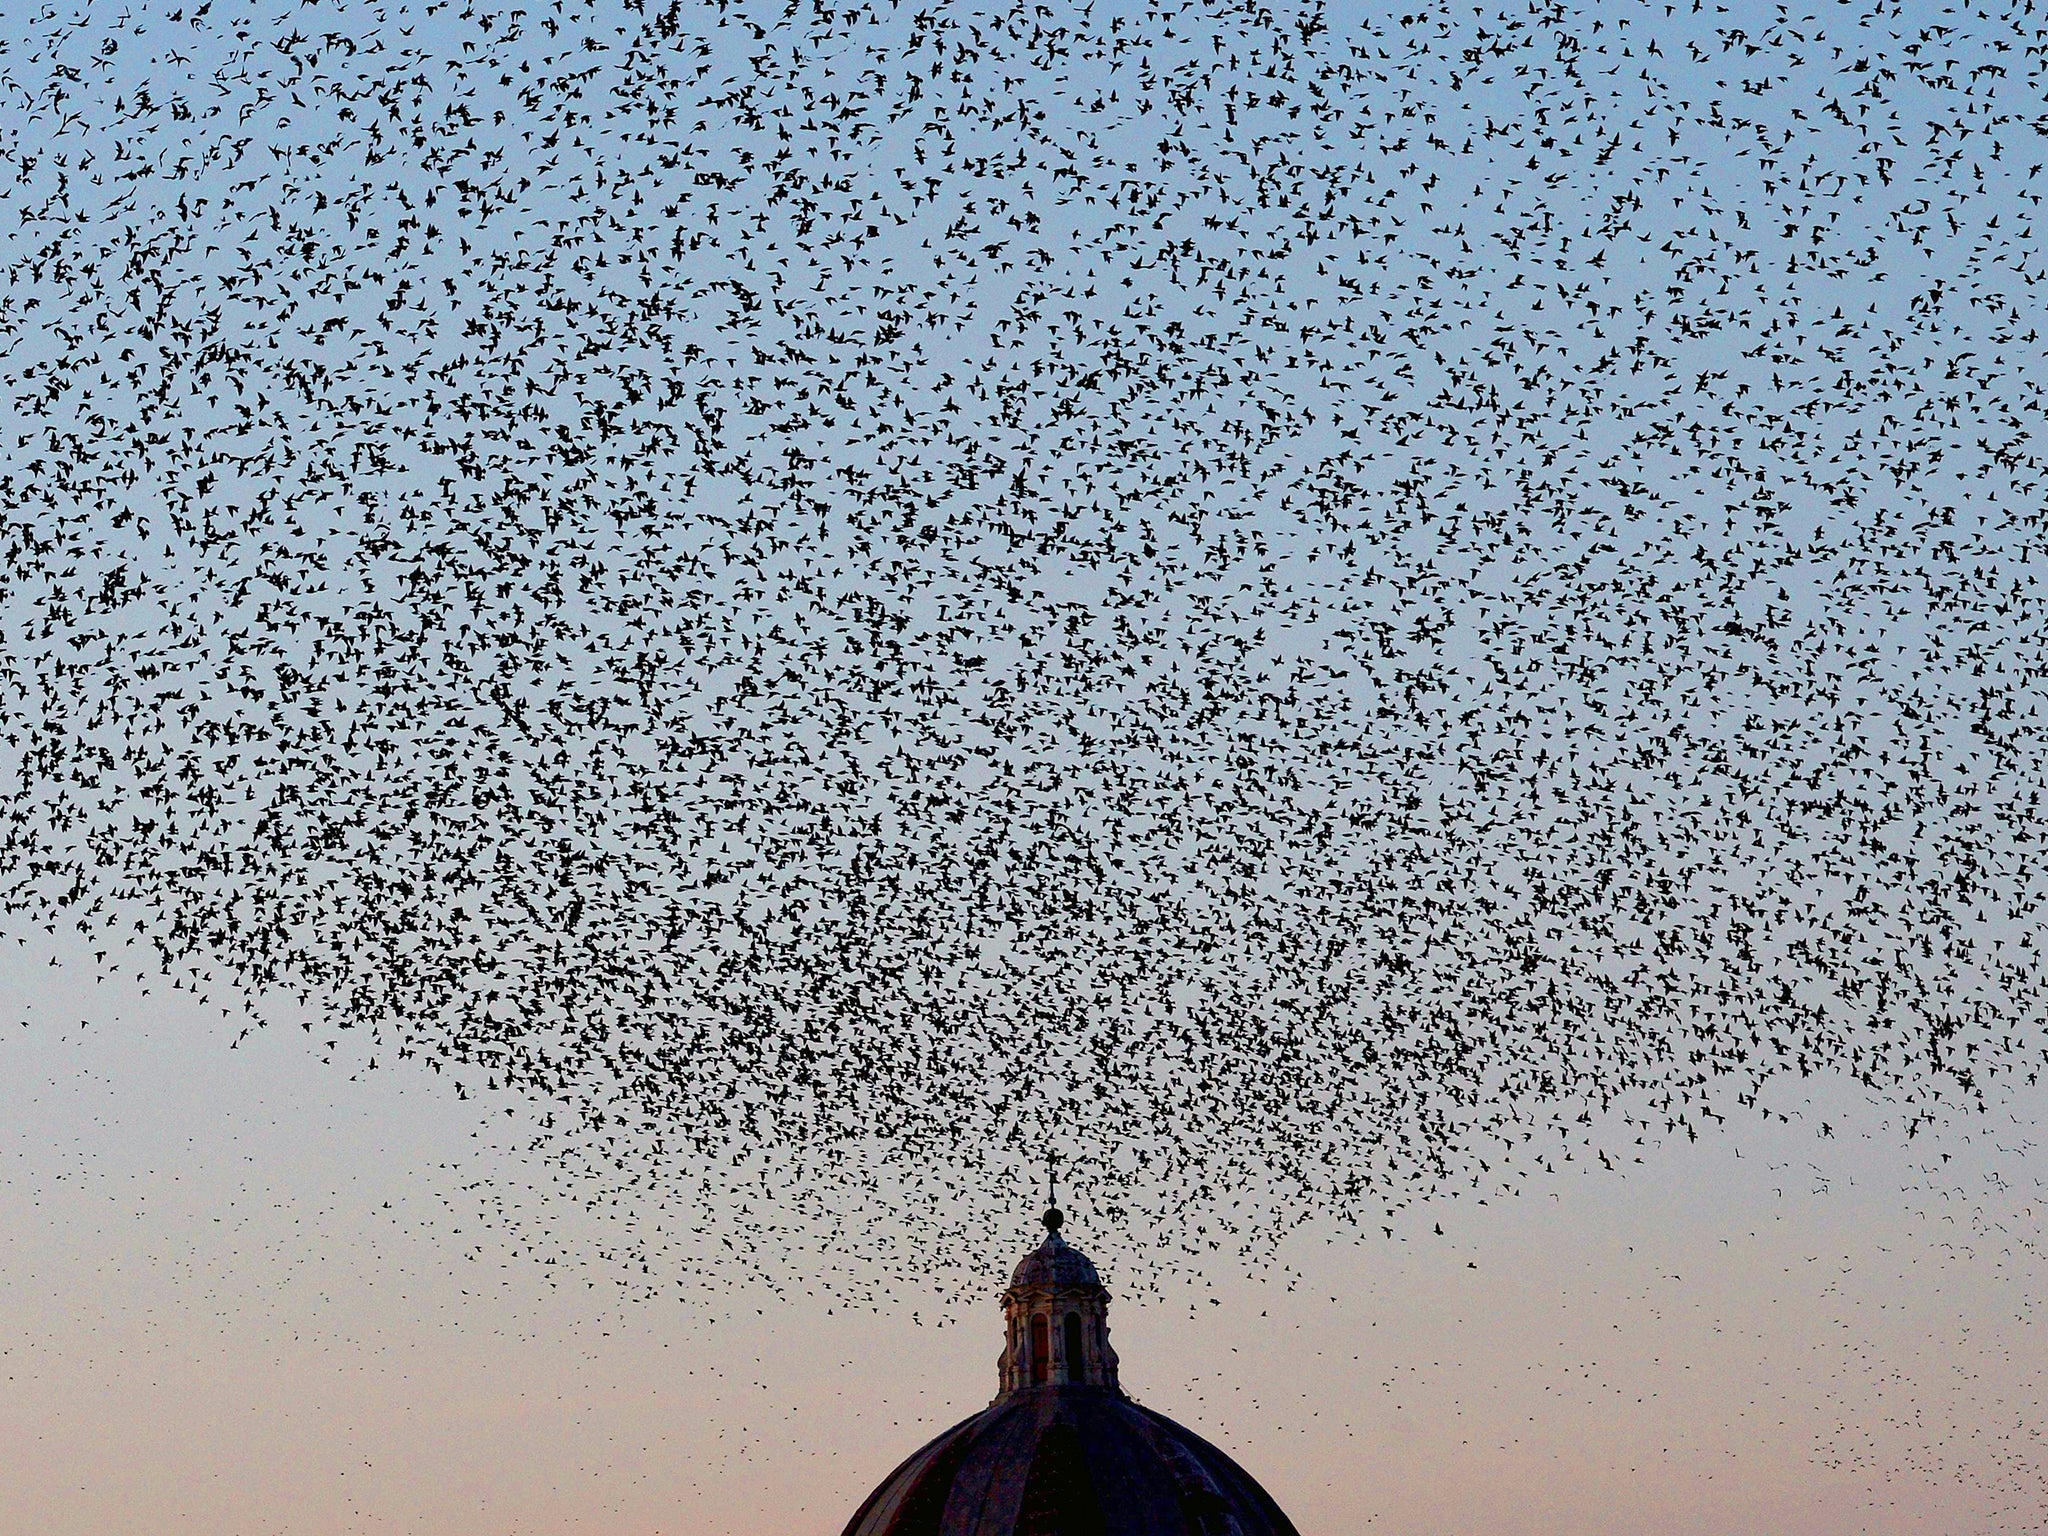 Starlings migrating from northern Europe fly in the sky above Rome. About one-million starlings migrate in Rome during autumn and winter time and draw beautiful patterns in the sky before spending the nights in the trees by the Tiber river, creating chaos in the neighborhood with their droppings